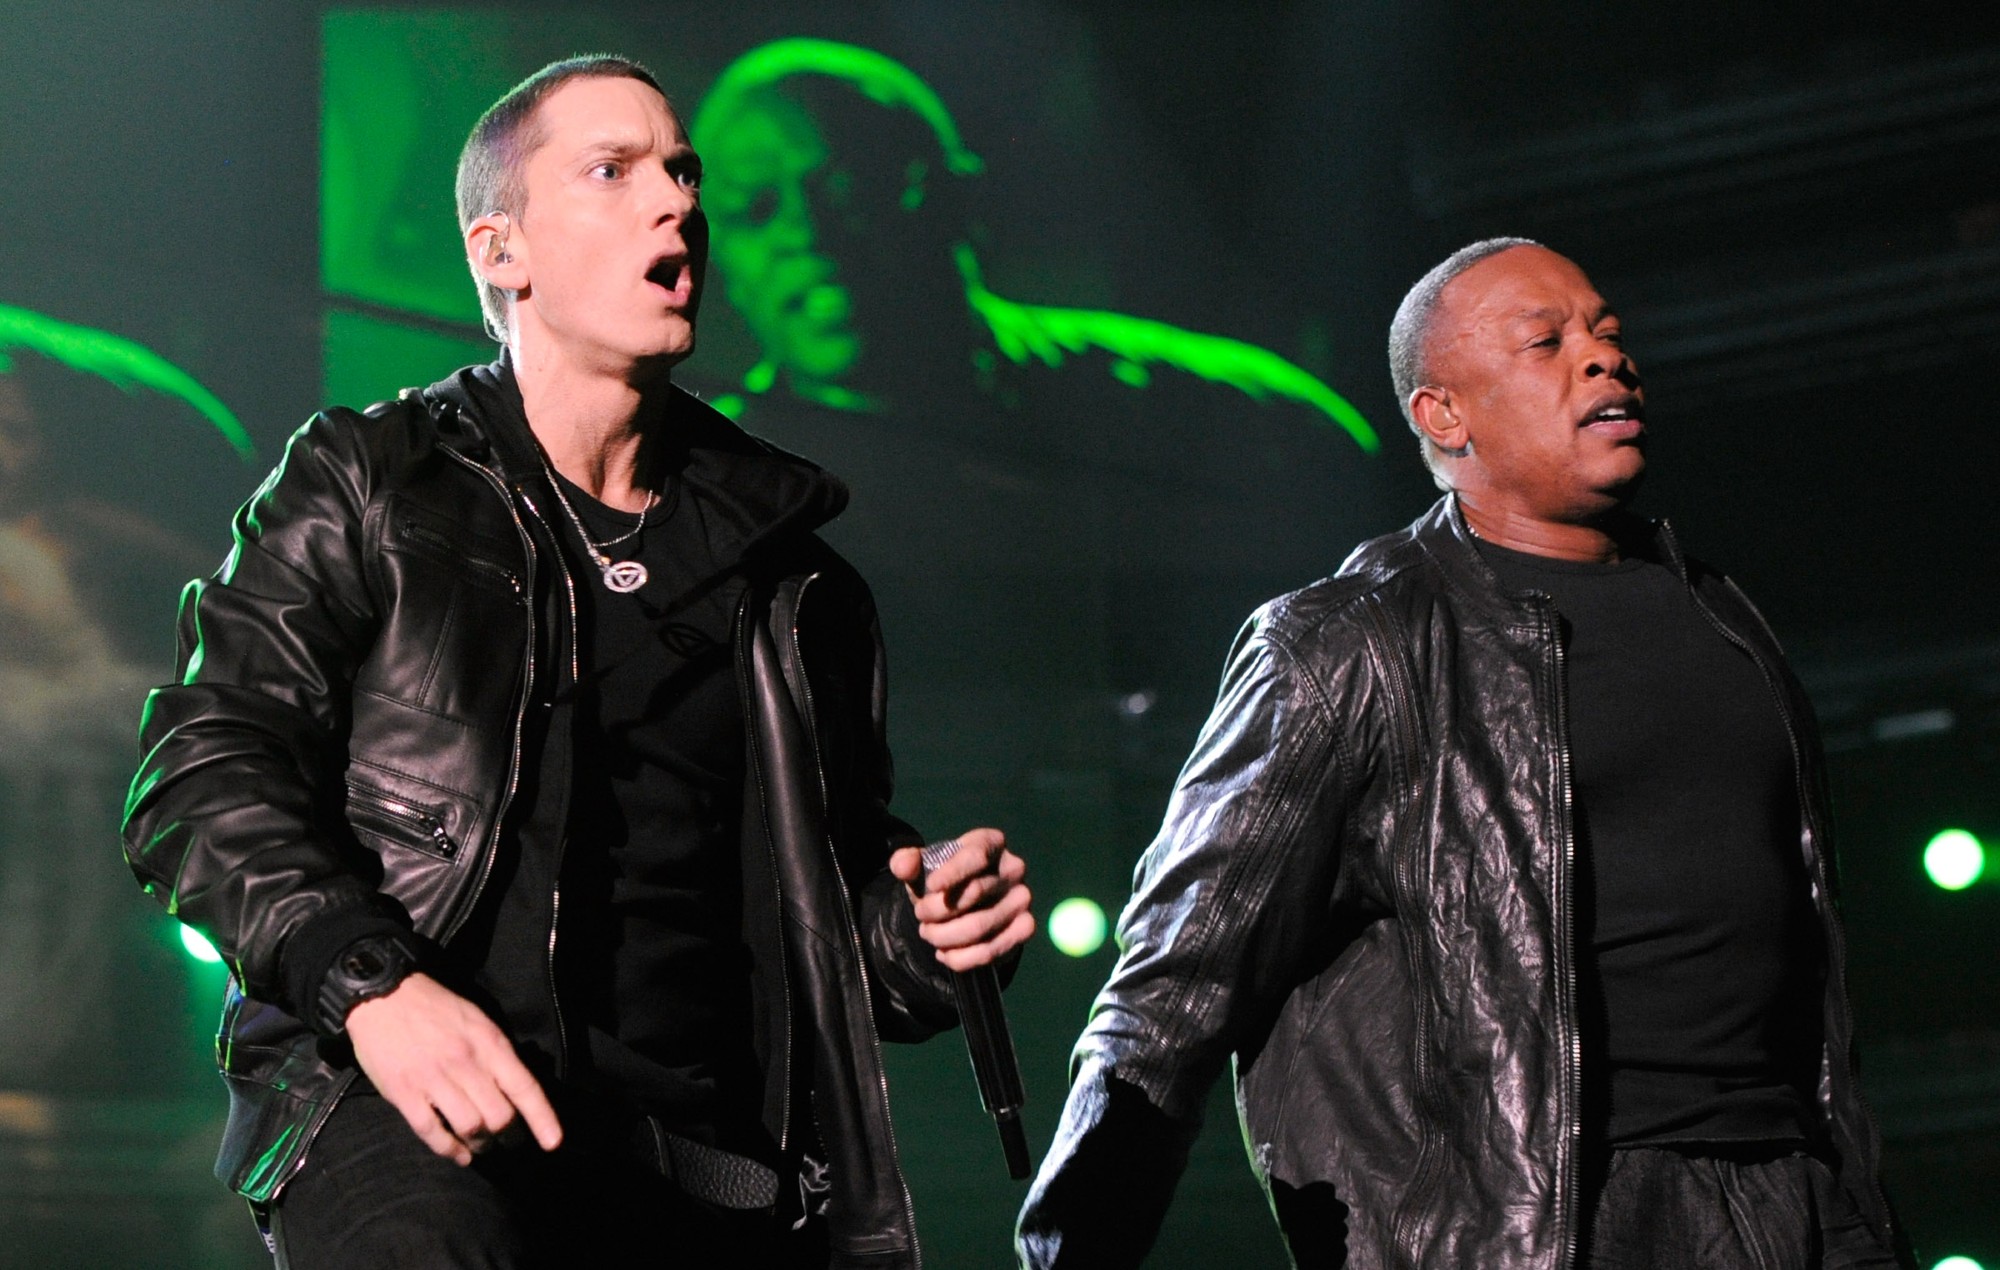 Eminem to release new album this year, Dr. Dre reveals